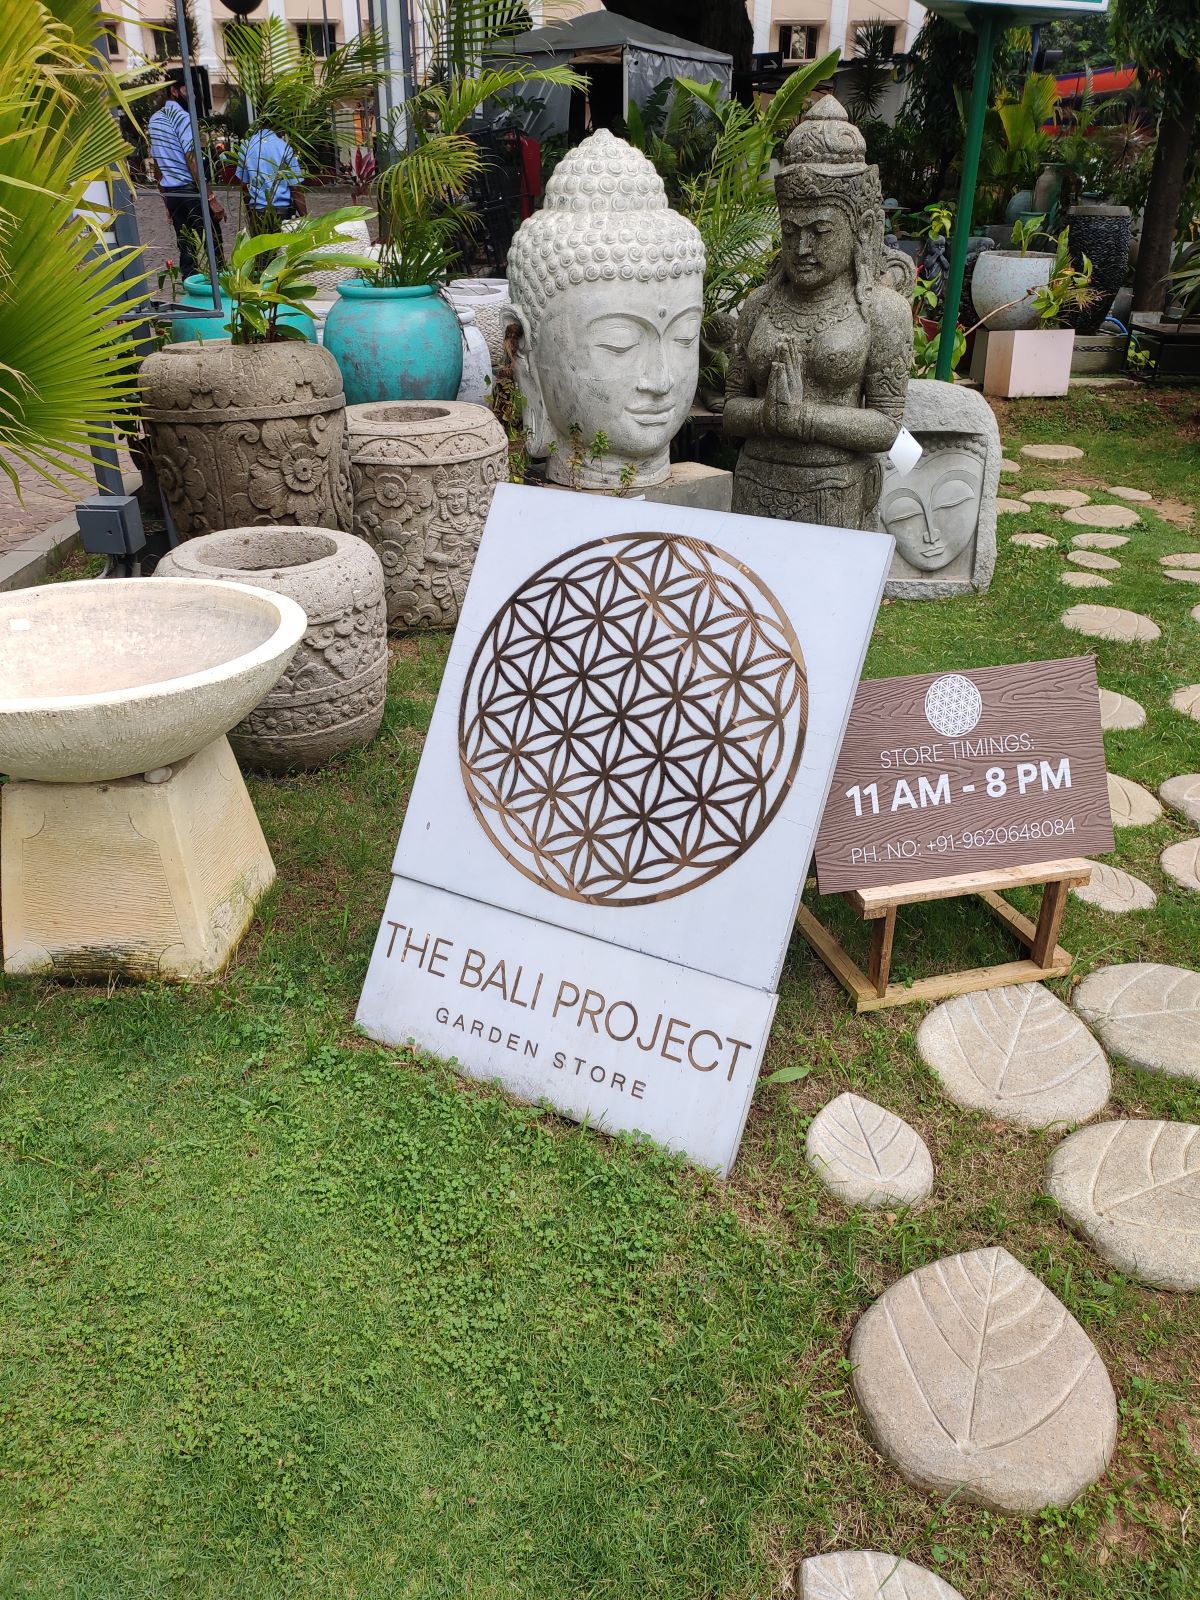 The Bali Project